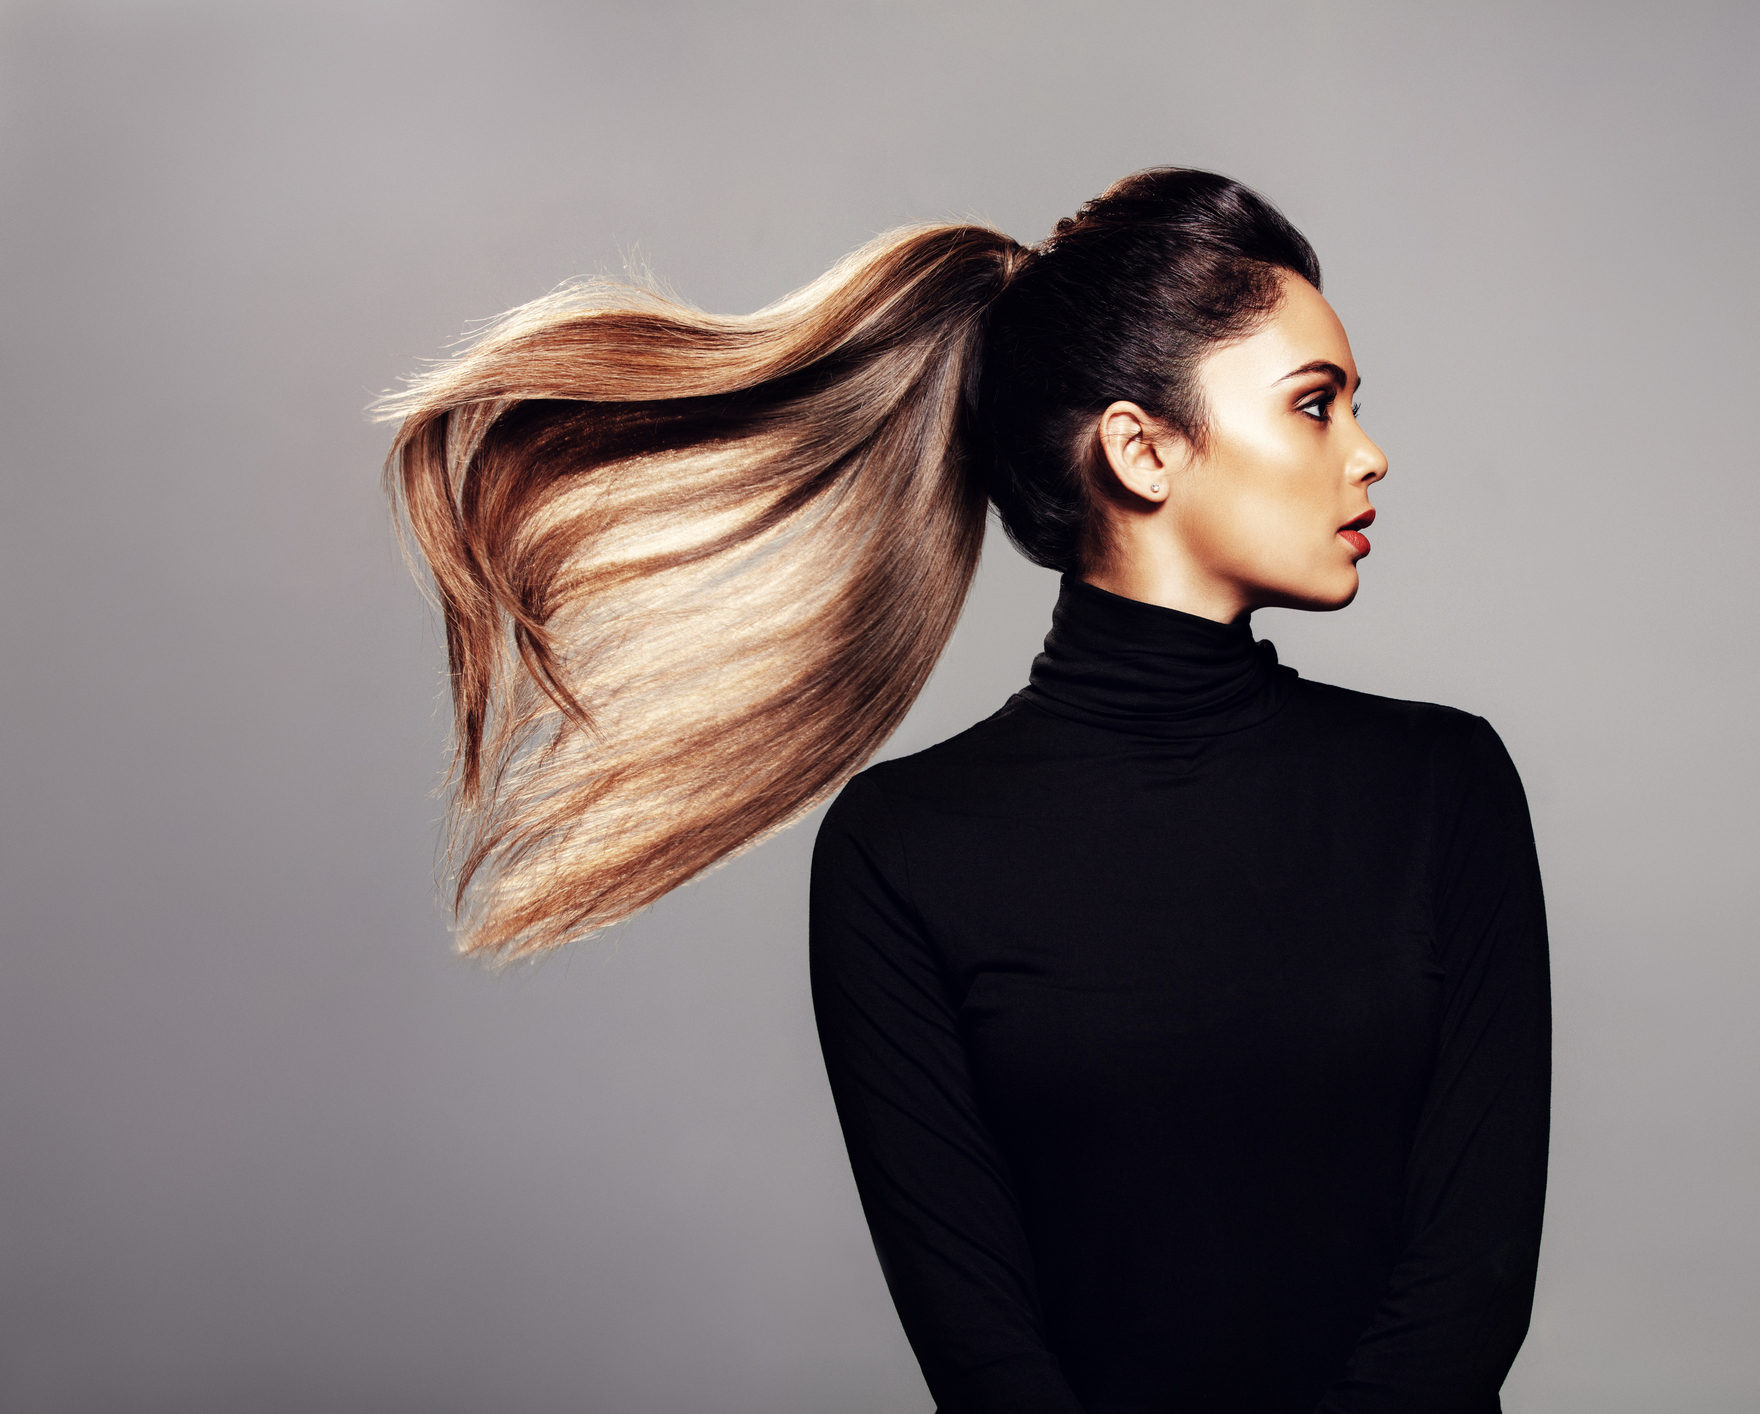 Studio shot of stylish young woman with flying hair against grey background. Female fashion model with long hair.